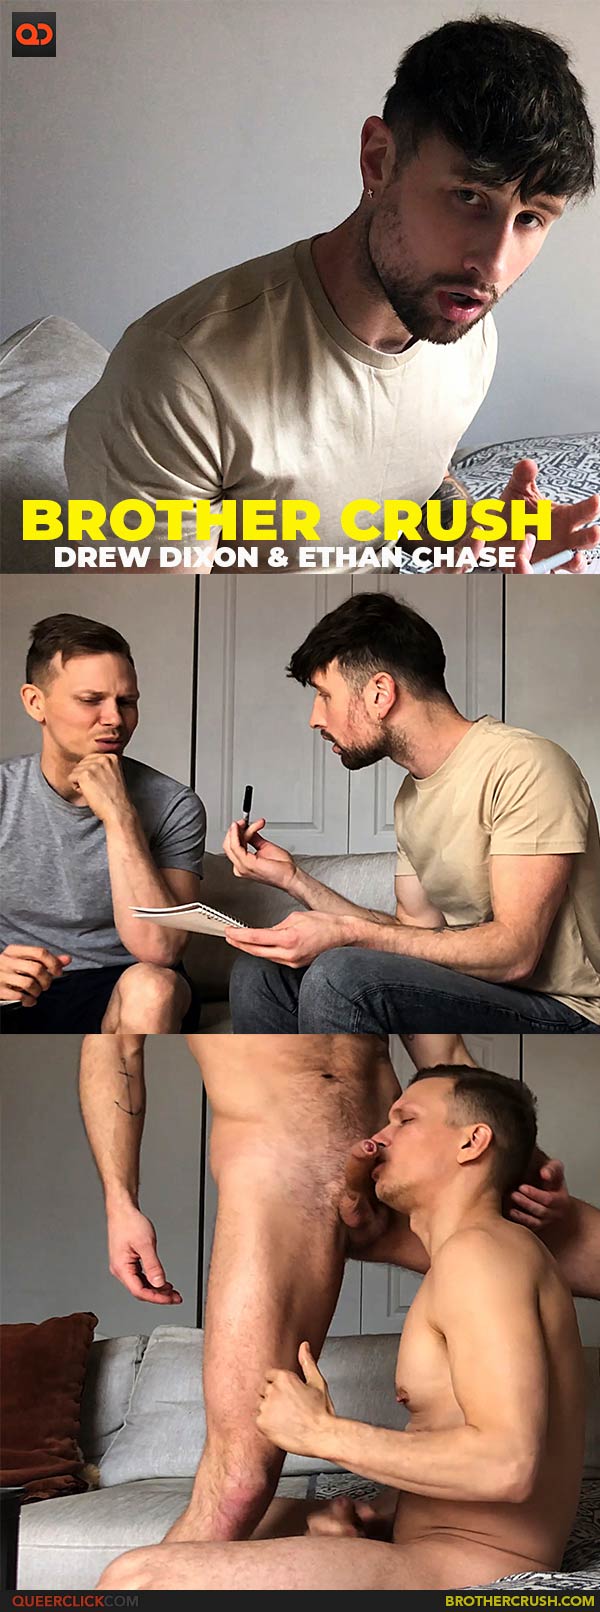 BrotherCrush: Drew Dixon and Ethan Chase